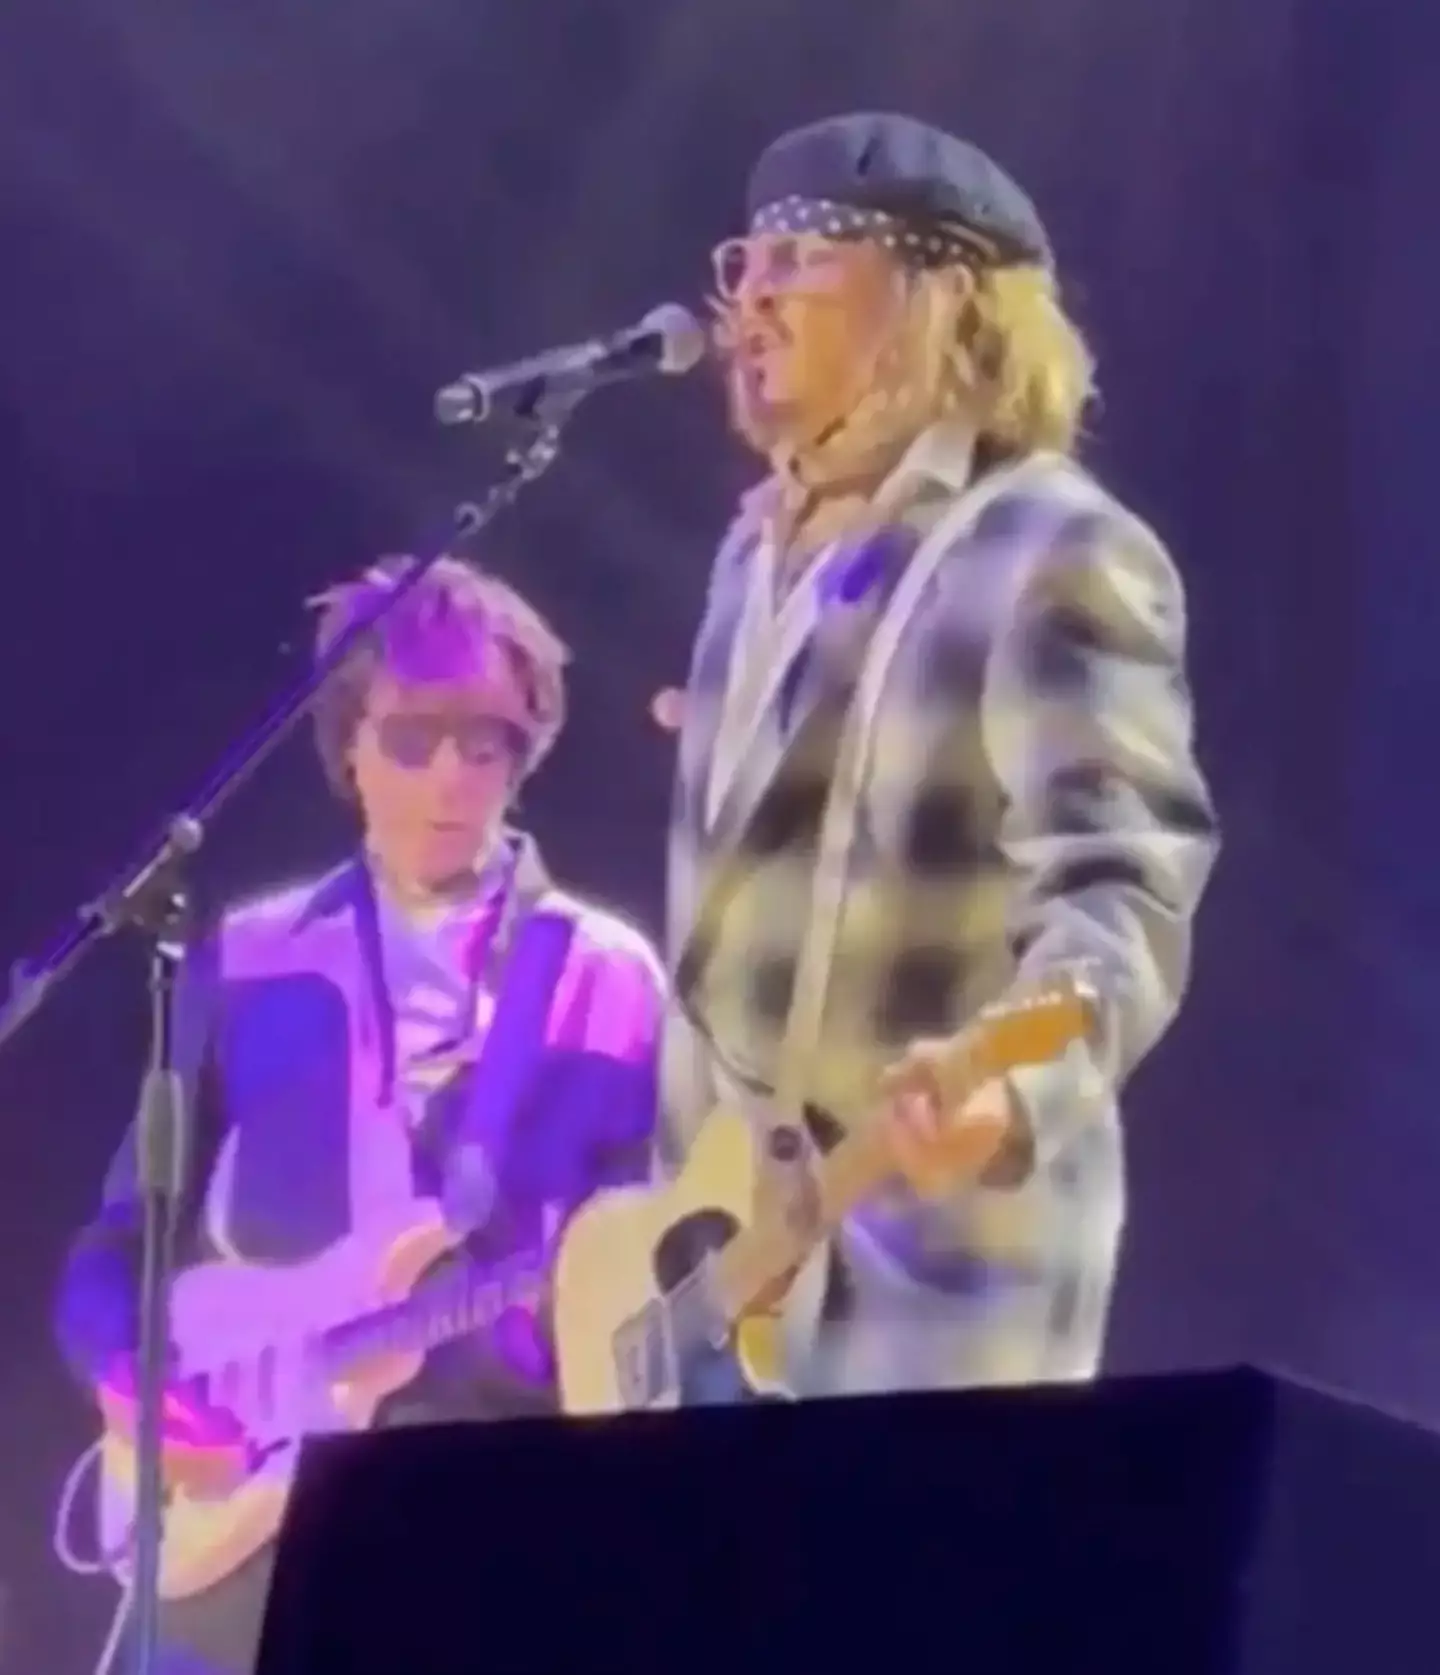 Depp made a surprise appearance in Sheffield.